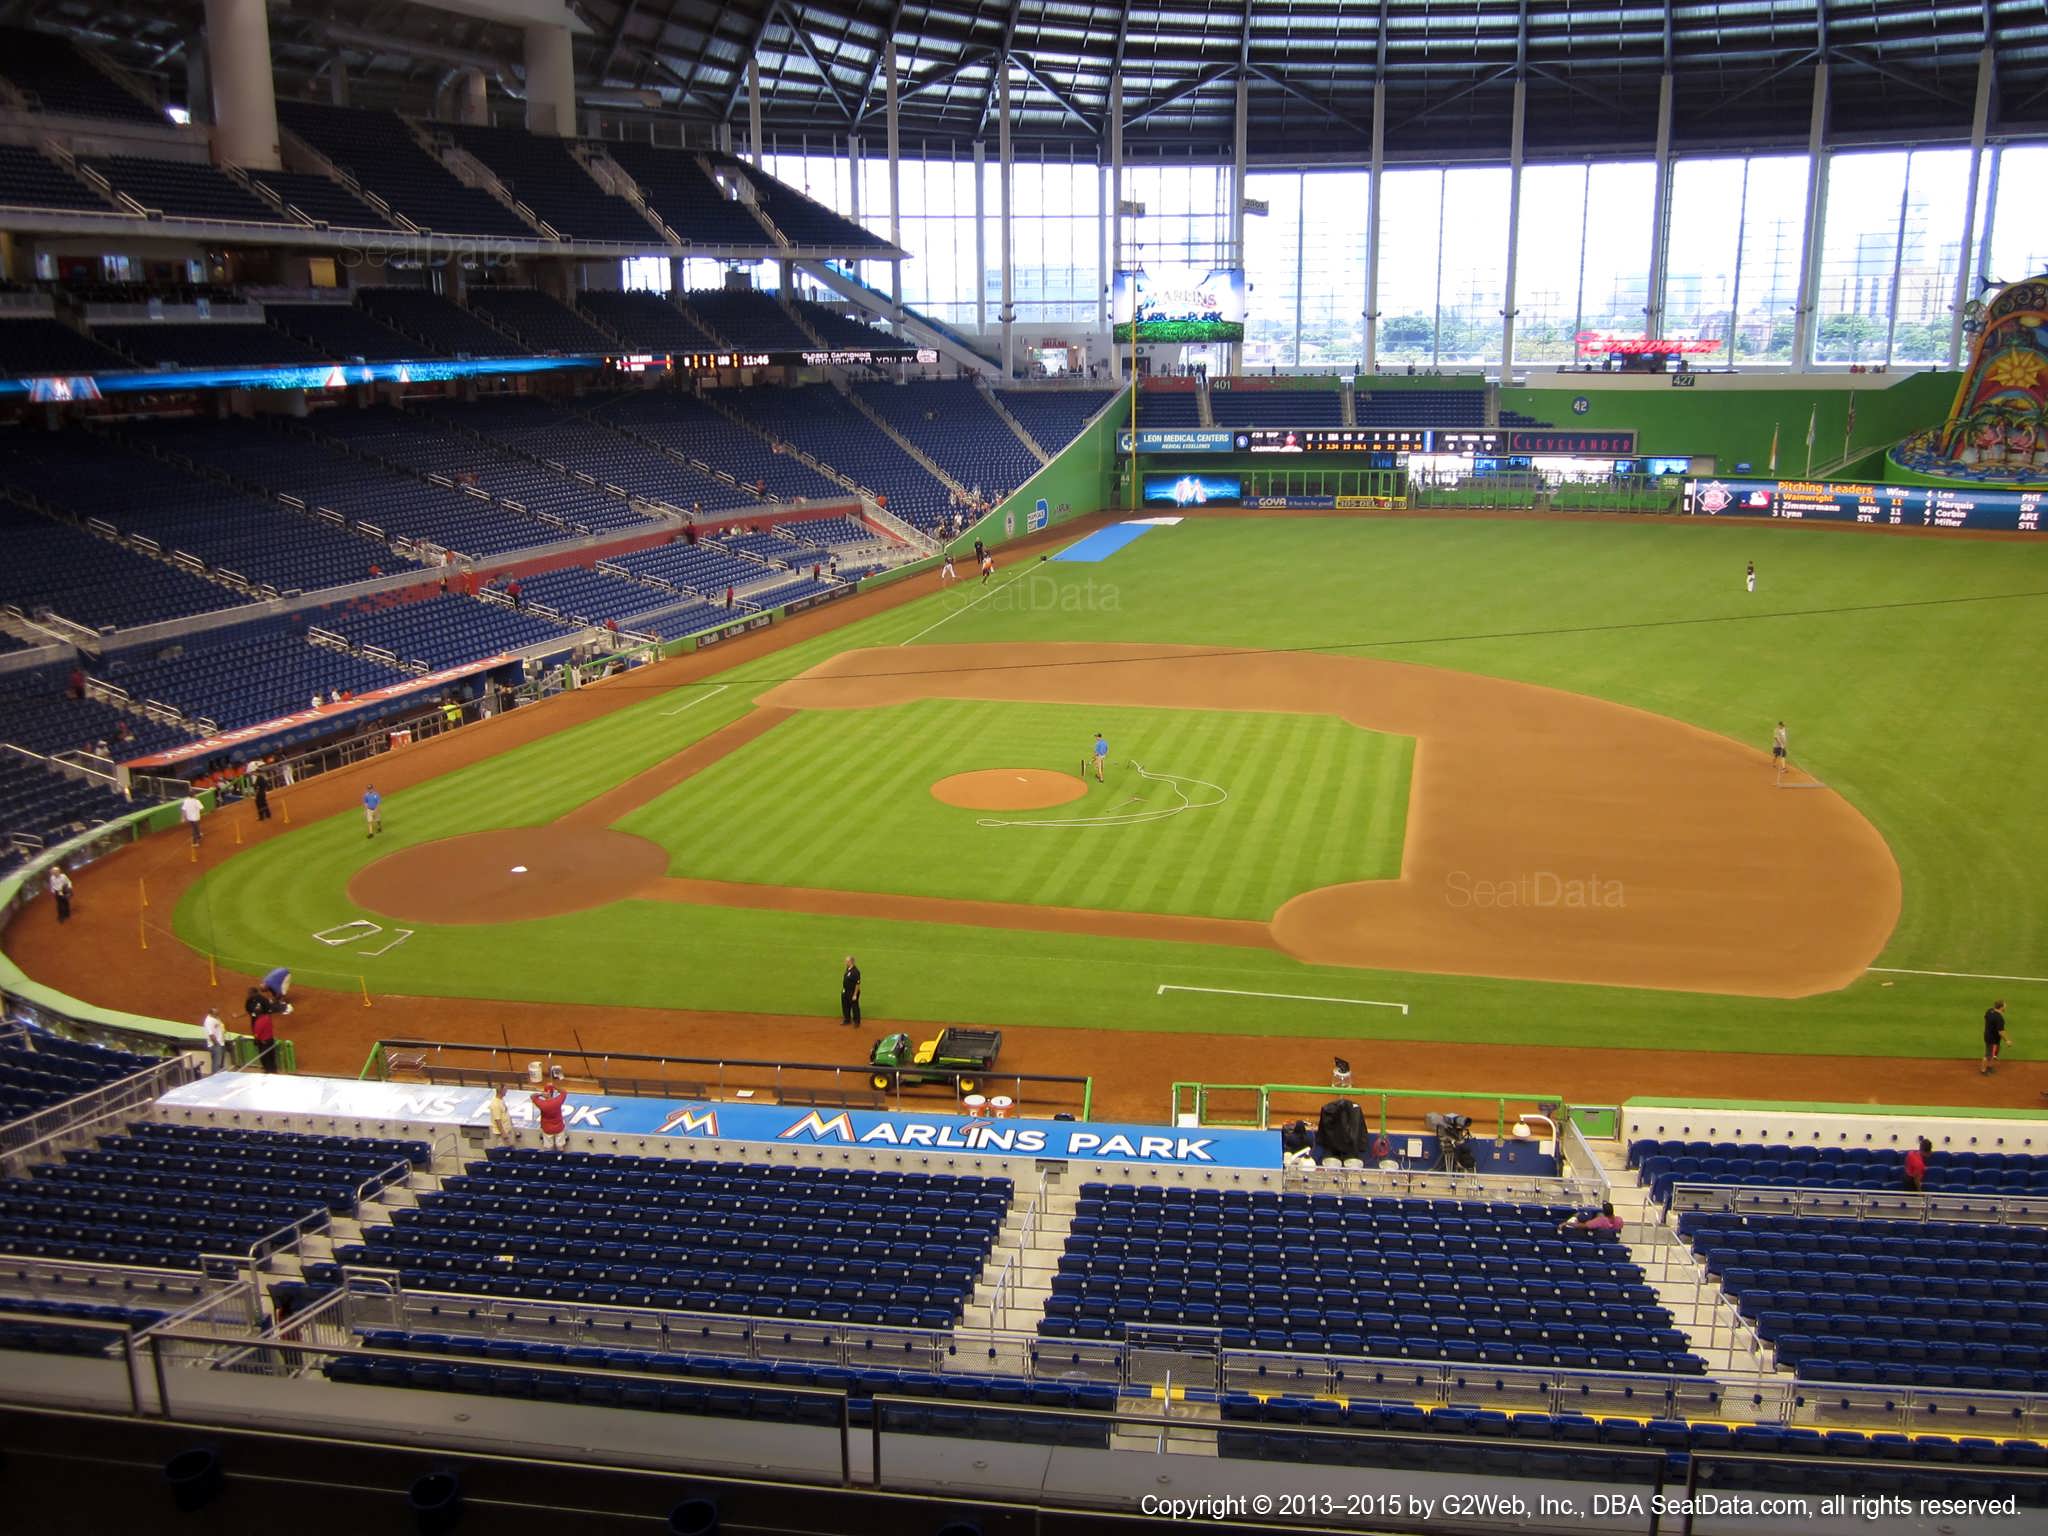 Seat view from section 209 at Marlins Park, home of the Miami Marlins